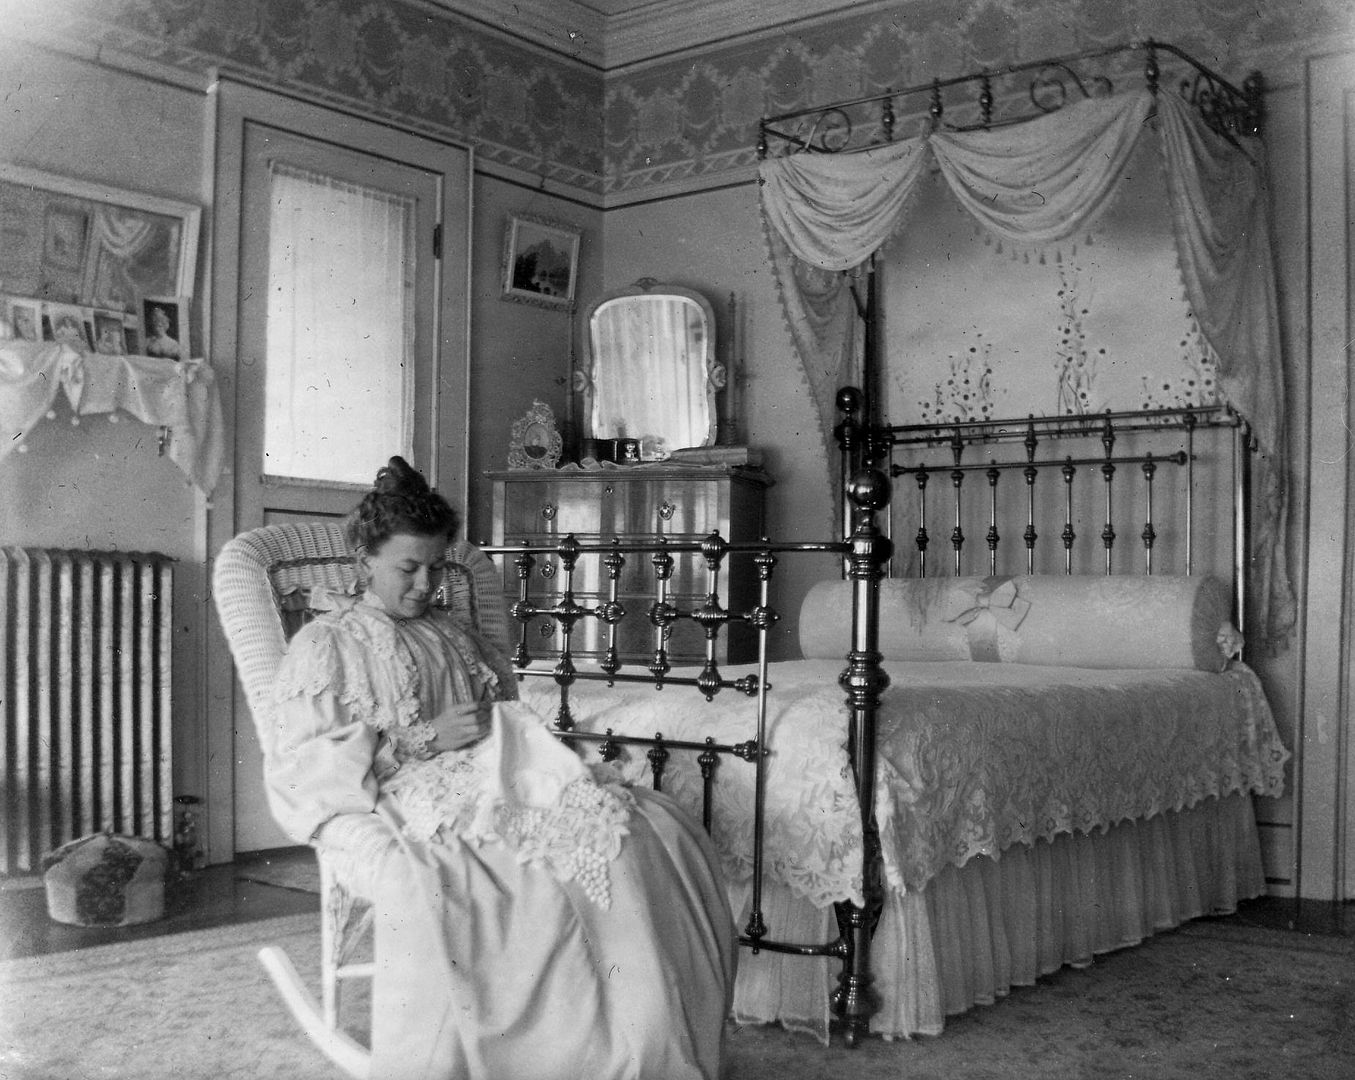 Addie, in the bedroom where she was allegedly shot by her husband, Enoch Fargo.